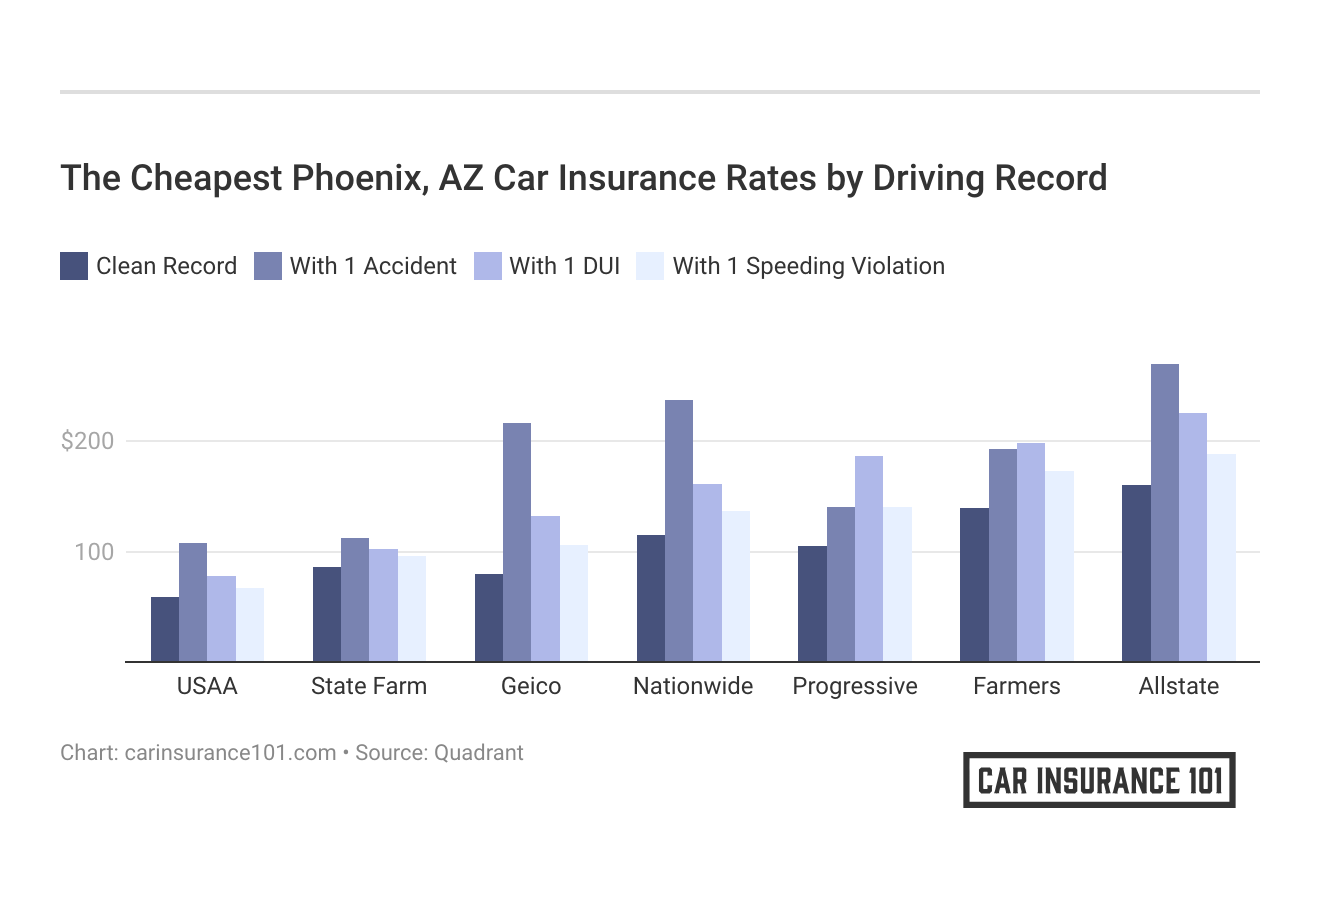 <h3>The Cheapest Phoenix, AZ Car Insurance Rates by Driving Record</h3>